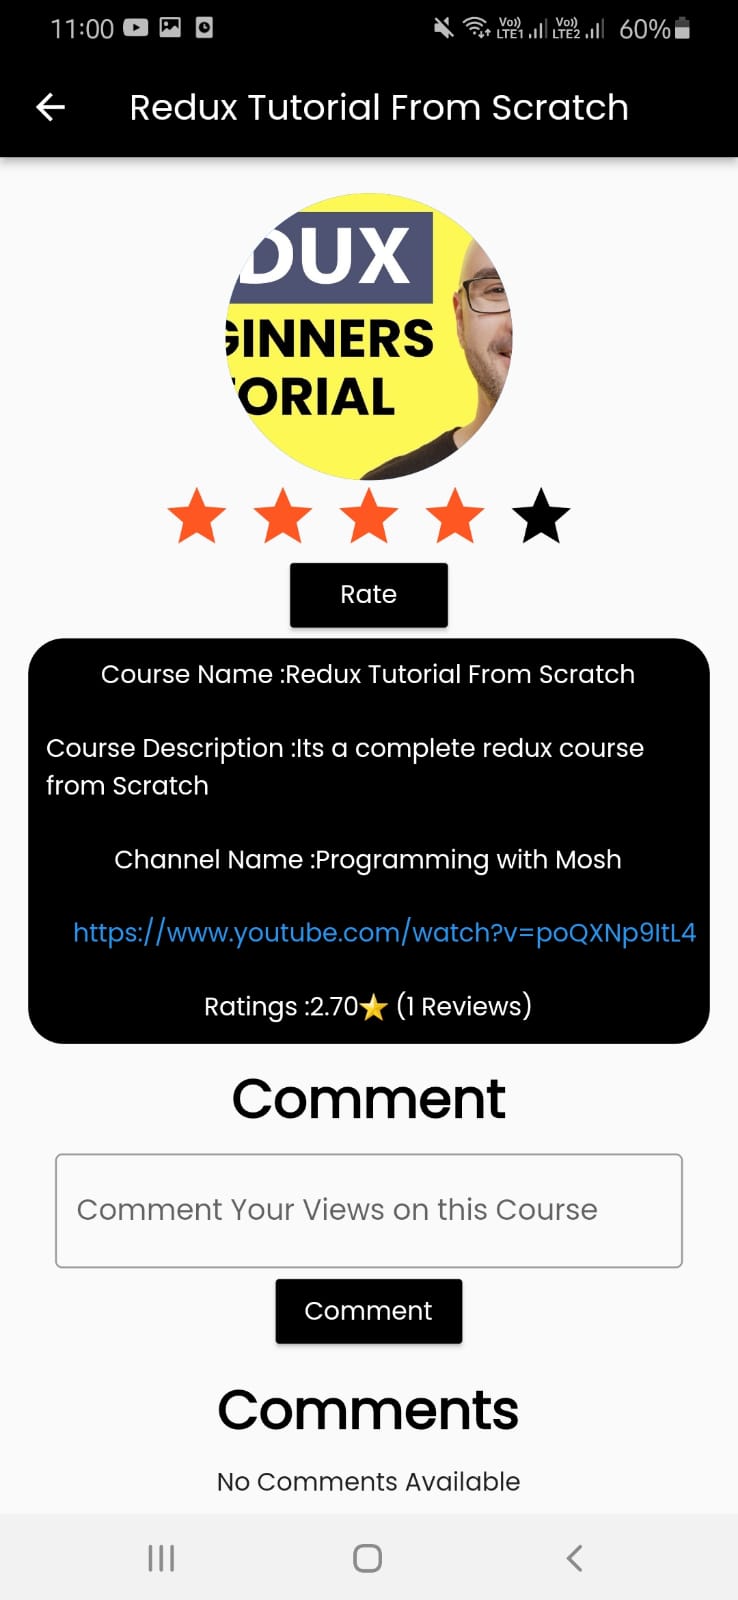 A Full Stack Flutter App Made To Help Students To Select The Best Course for the Tech stack They want to Learn